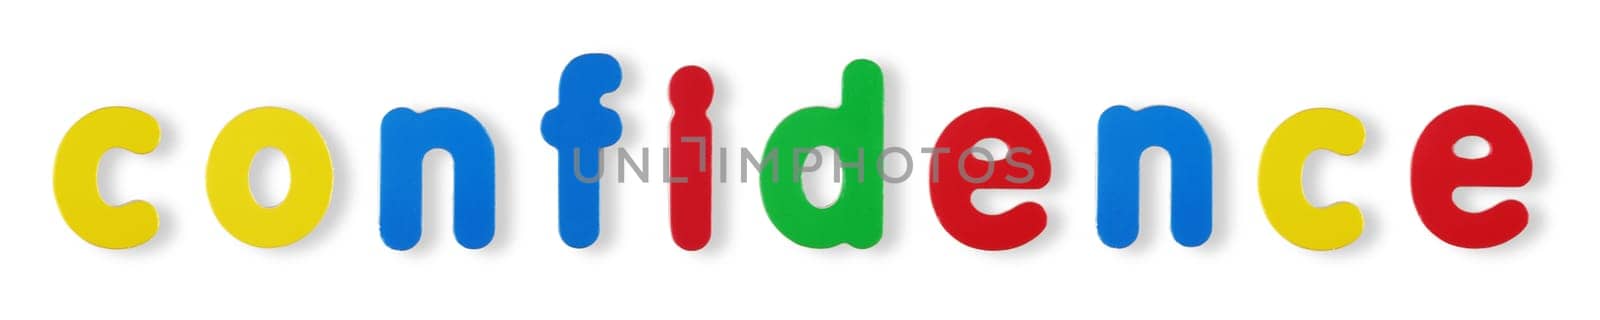 confidence word coloured magnetic letters on white with clipping path to remove shadow